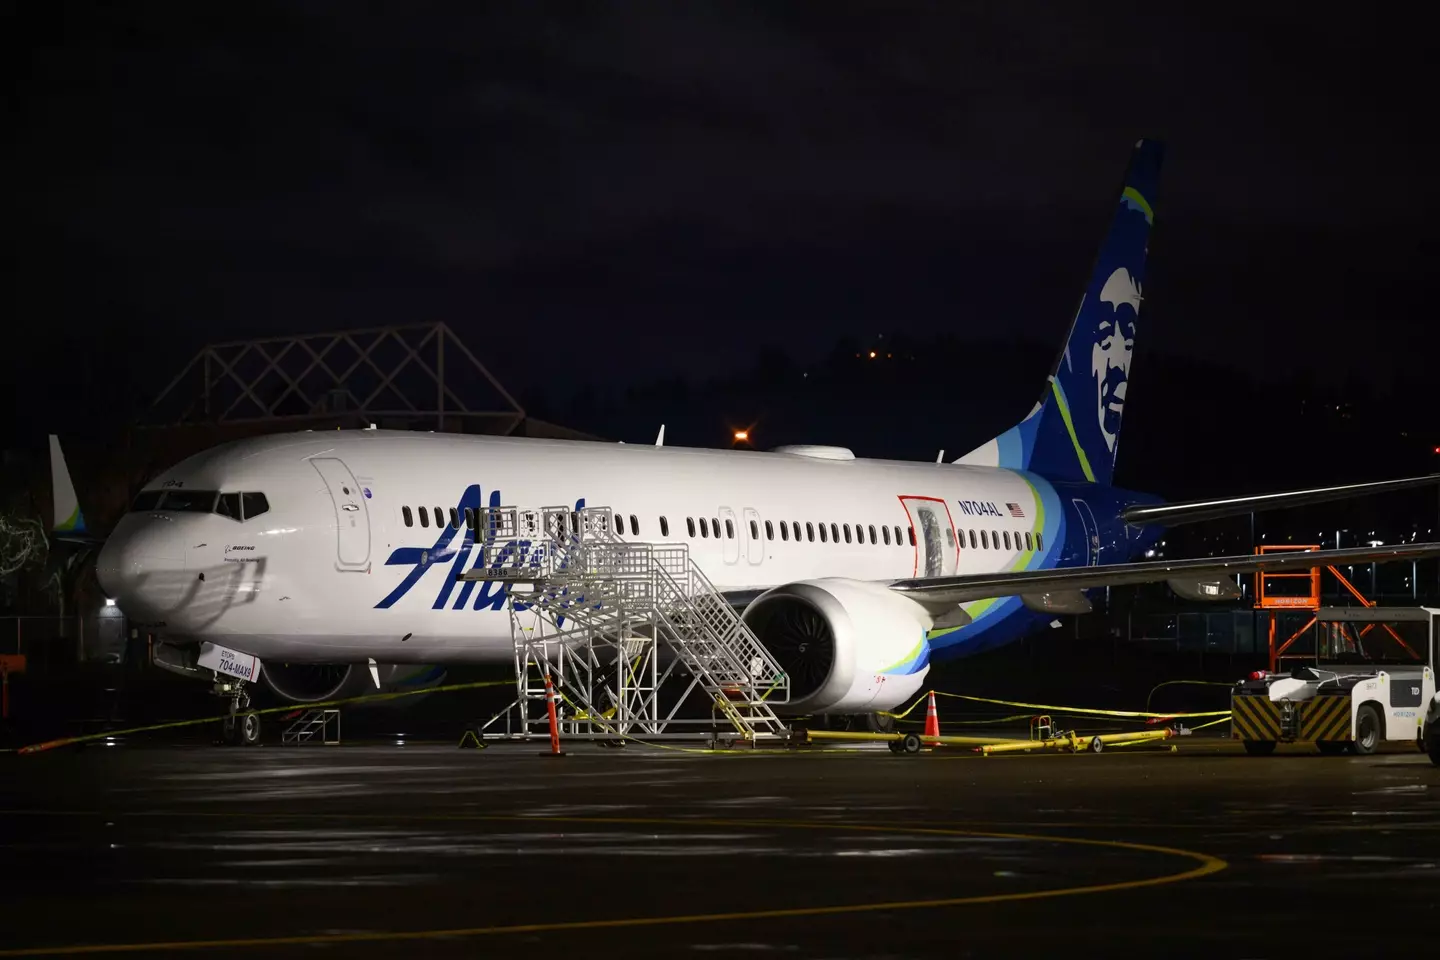 Boeing 737-9 Max jetliners have been grounded until investigations can wrap up.